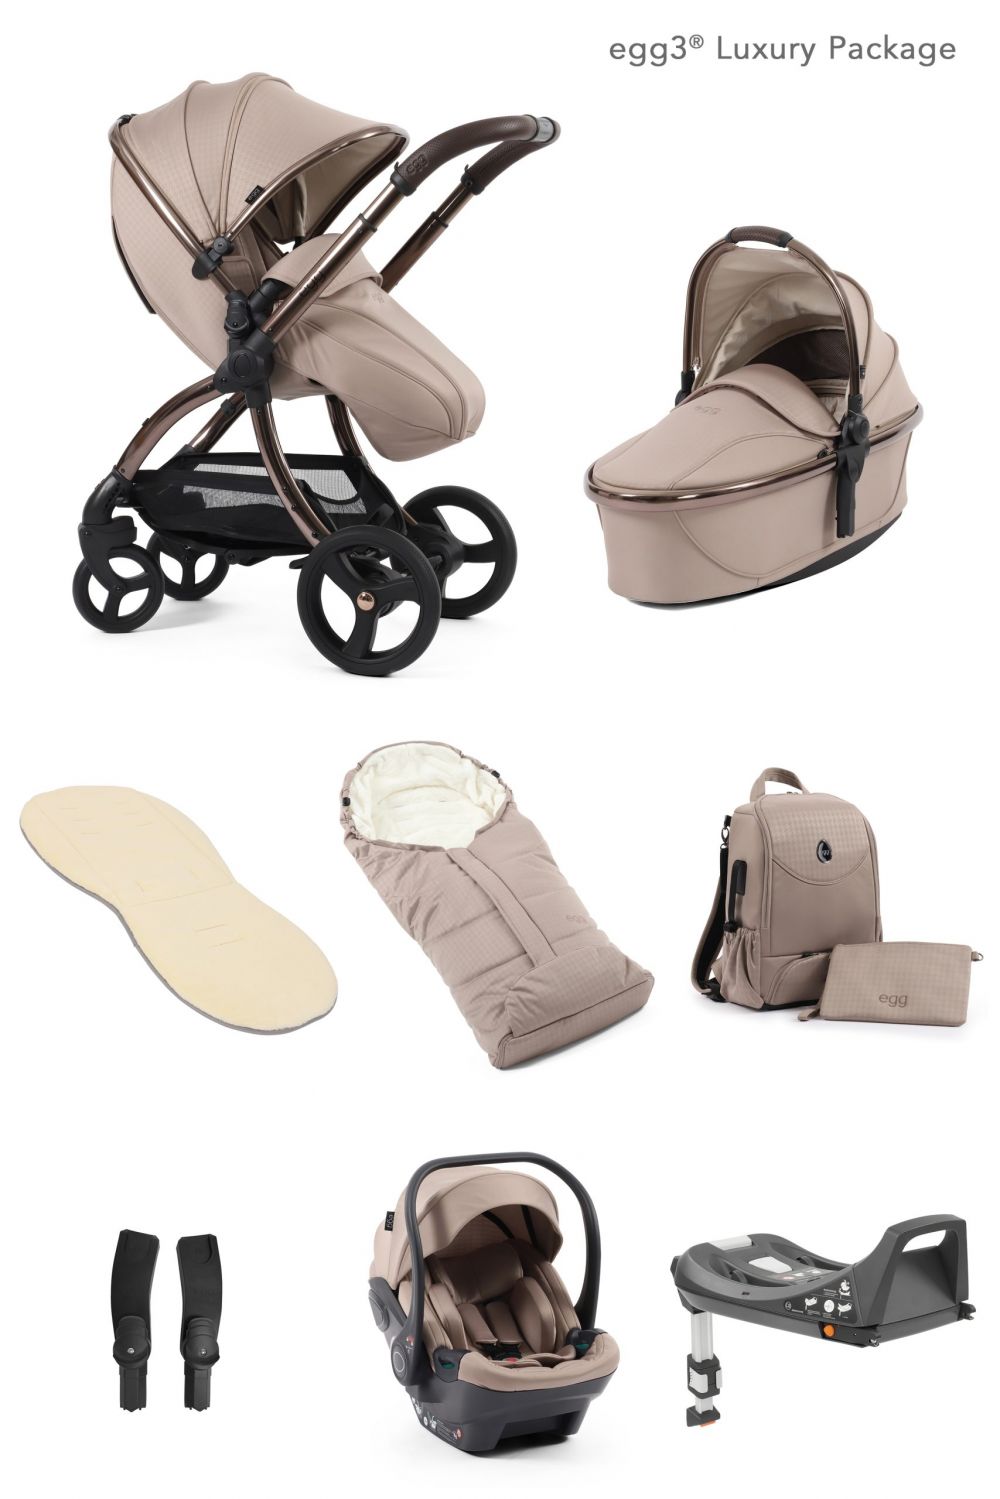 EGG3 Stroller - Luxury Bundle "Houndstooth Almond" - Special Edition Colour    "